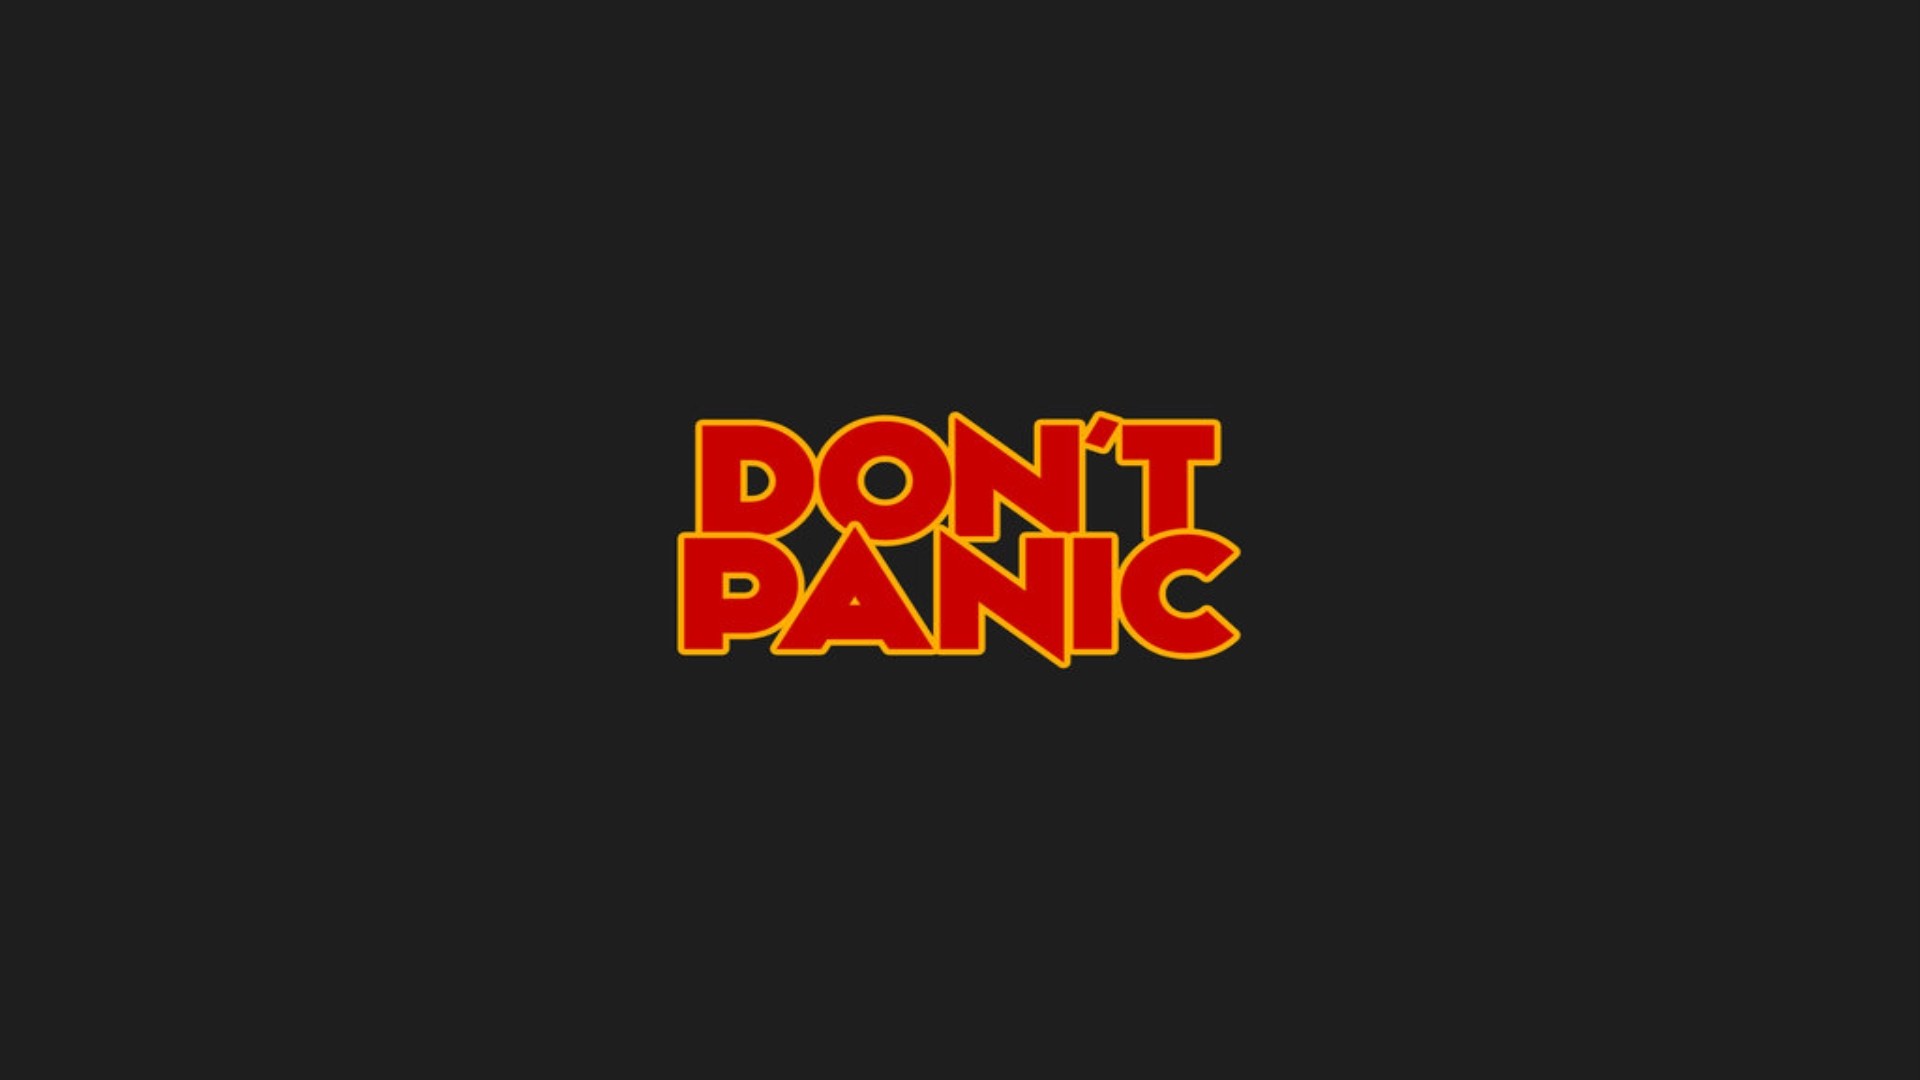 General 1920x1080 The Hitchhiker's Guide to the Galaxy science fiction simple background minimalism black background